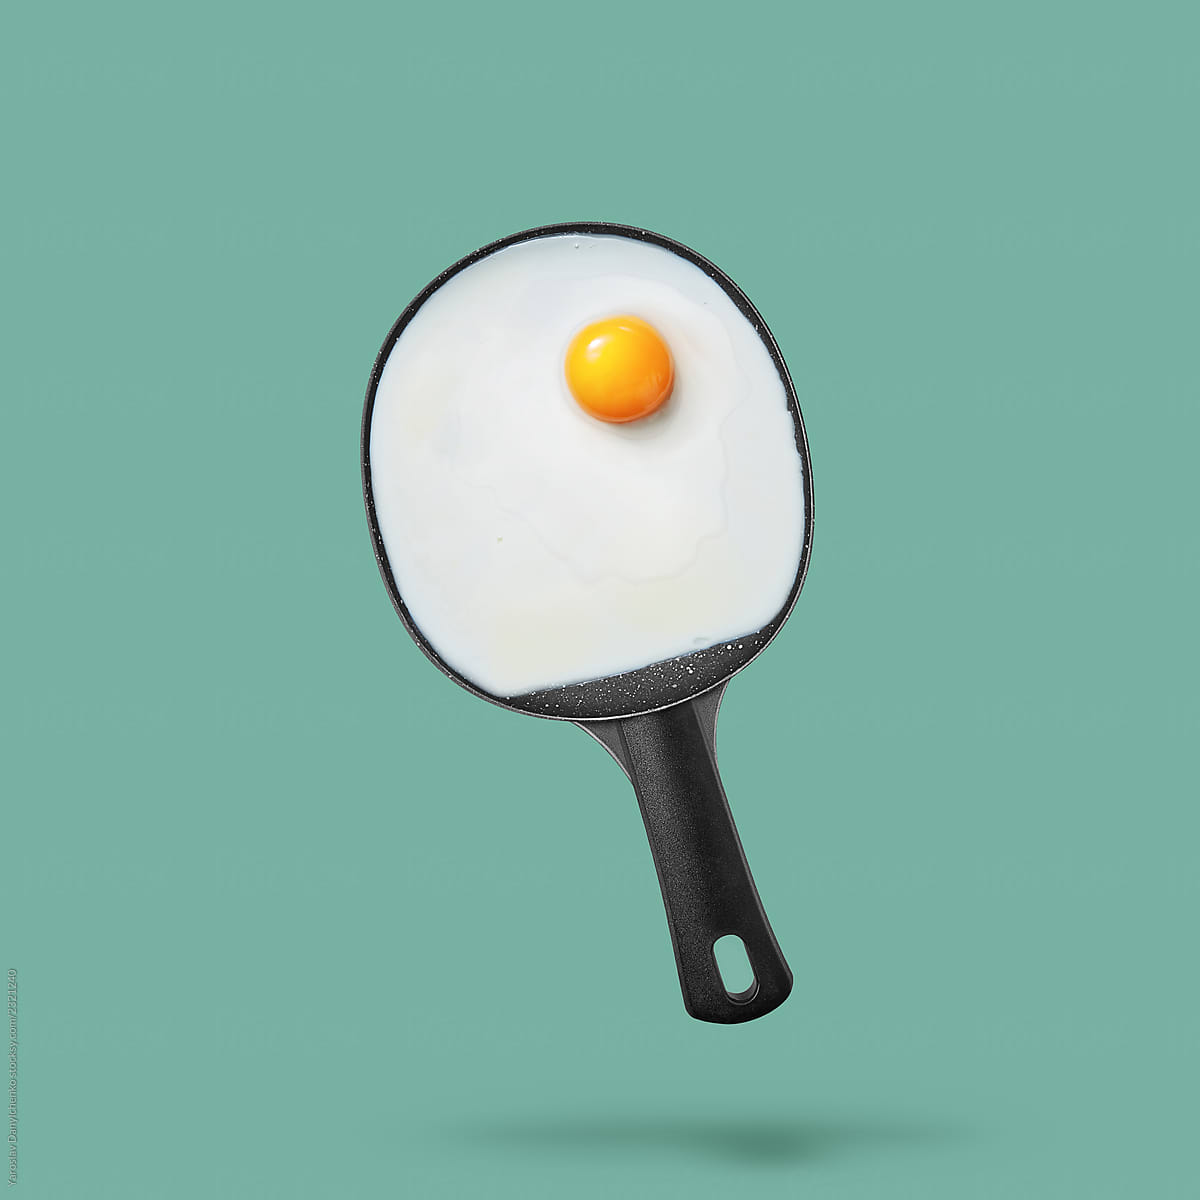 Fried eggs in a pan shaped racket on a green background with spa